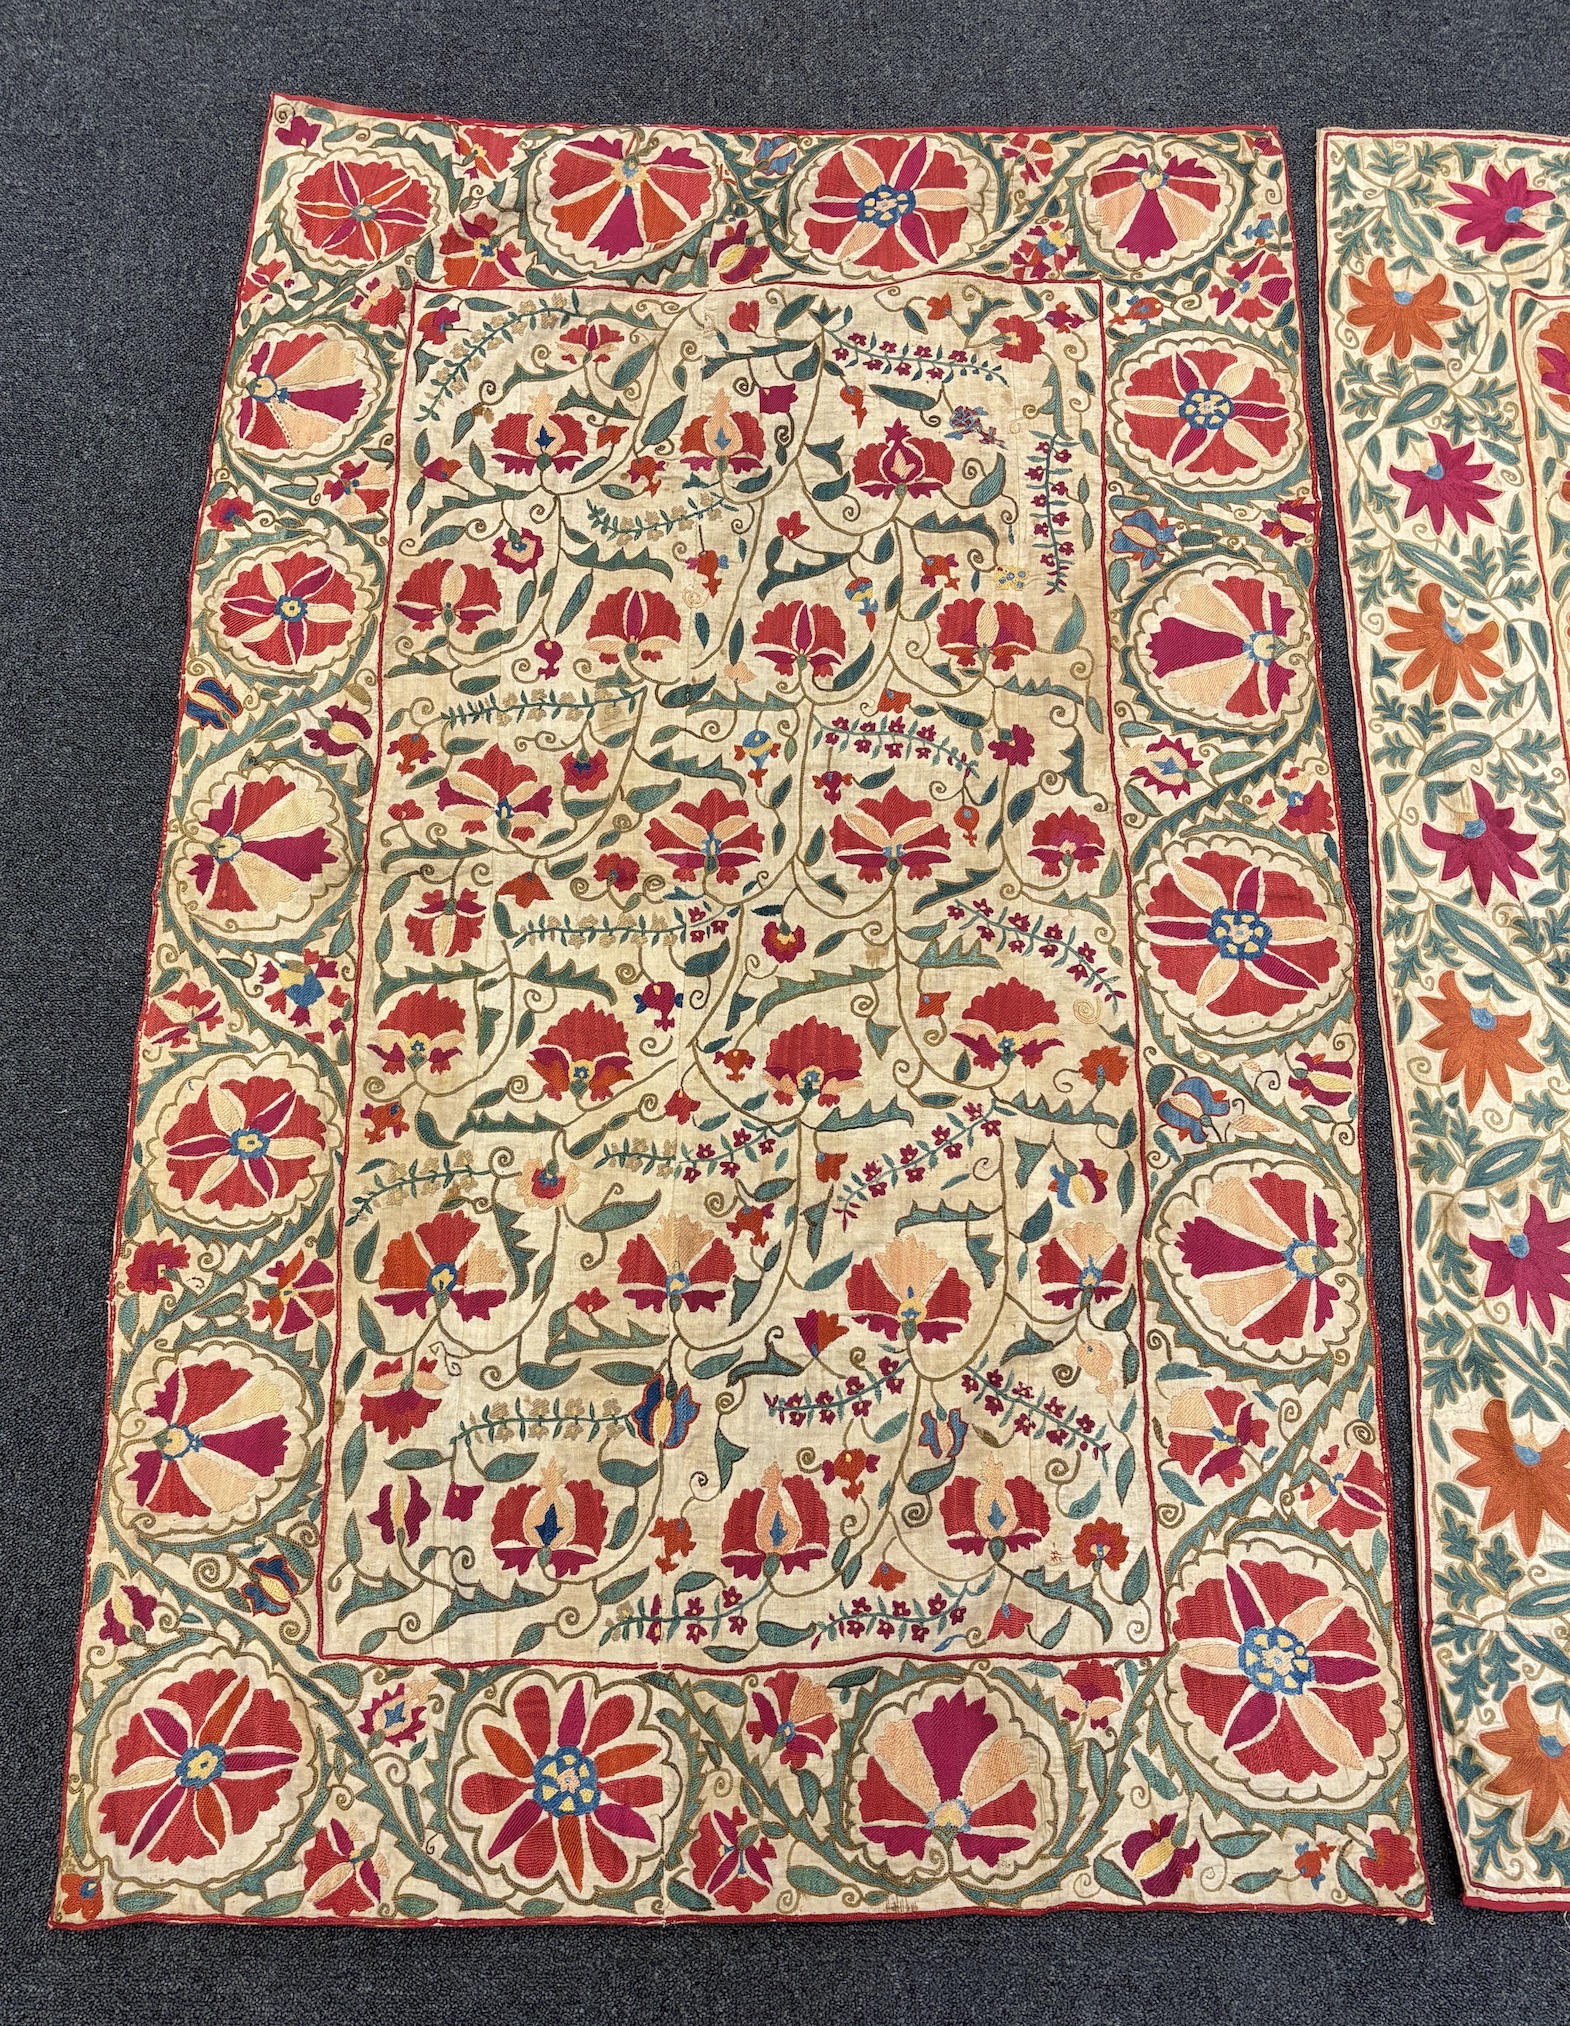 Two Uzbekistan Suzani, late 19th / early 20th century, embroidered hangings, on thick cotton, converted later to curtains, both richly embroidered with a wide floral frieze and a central all over floral design using Bukh